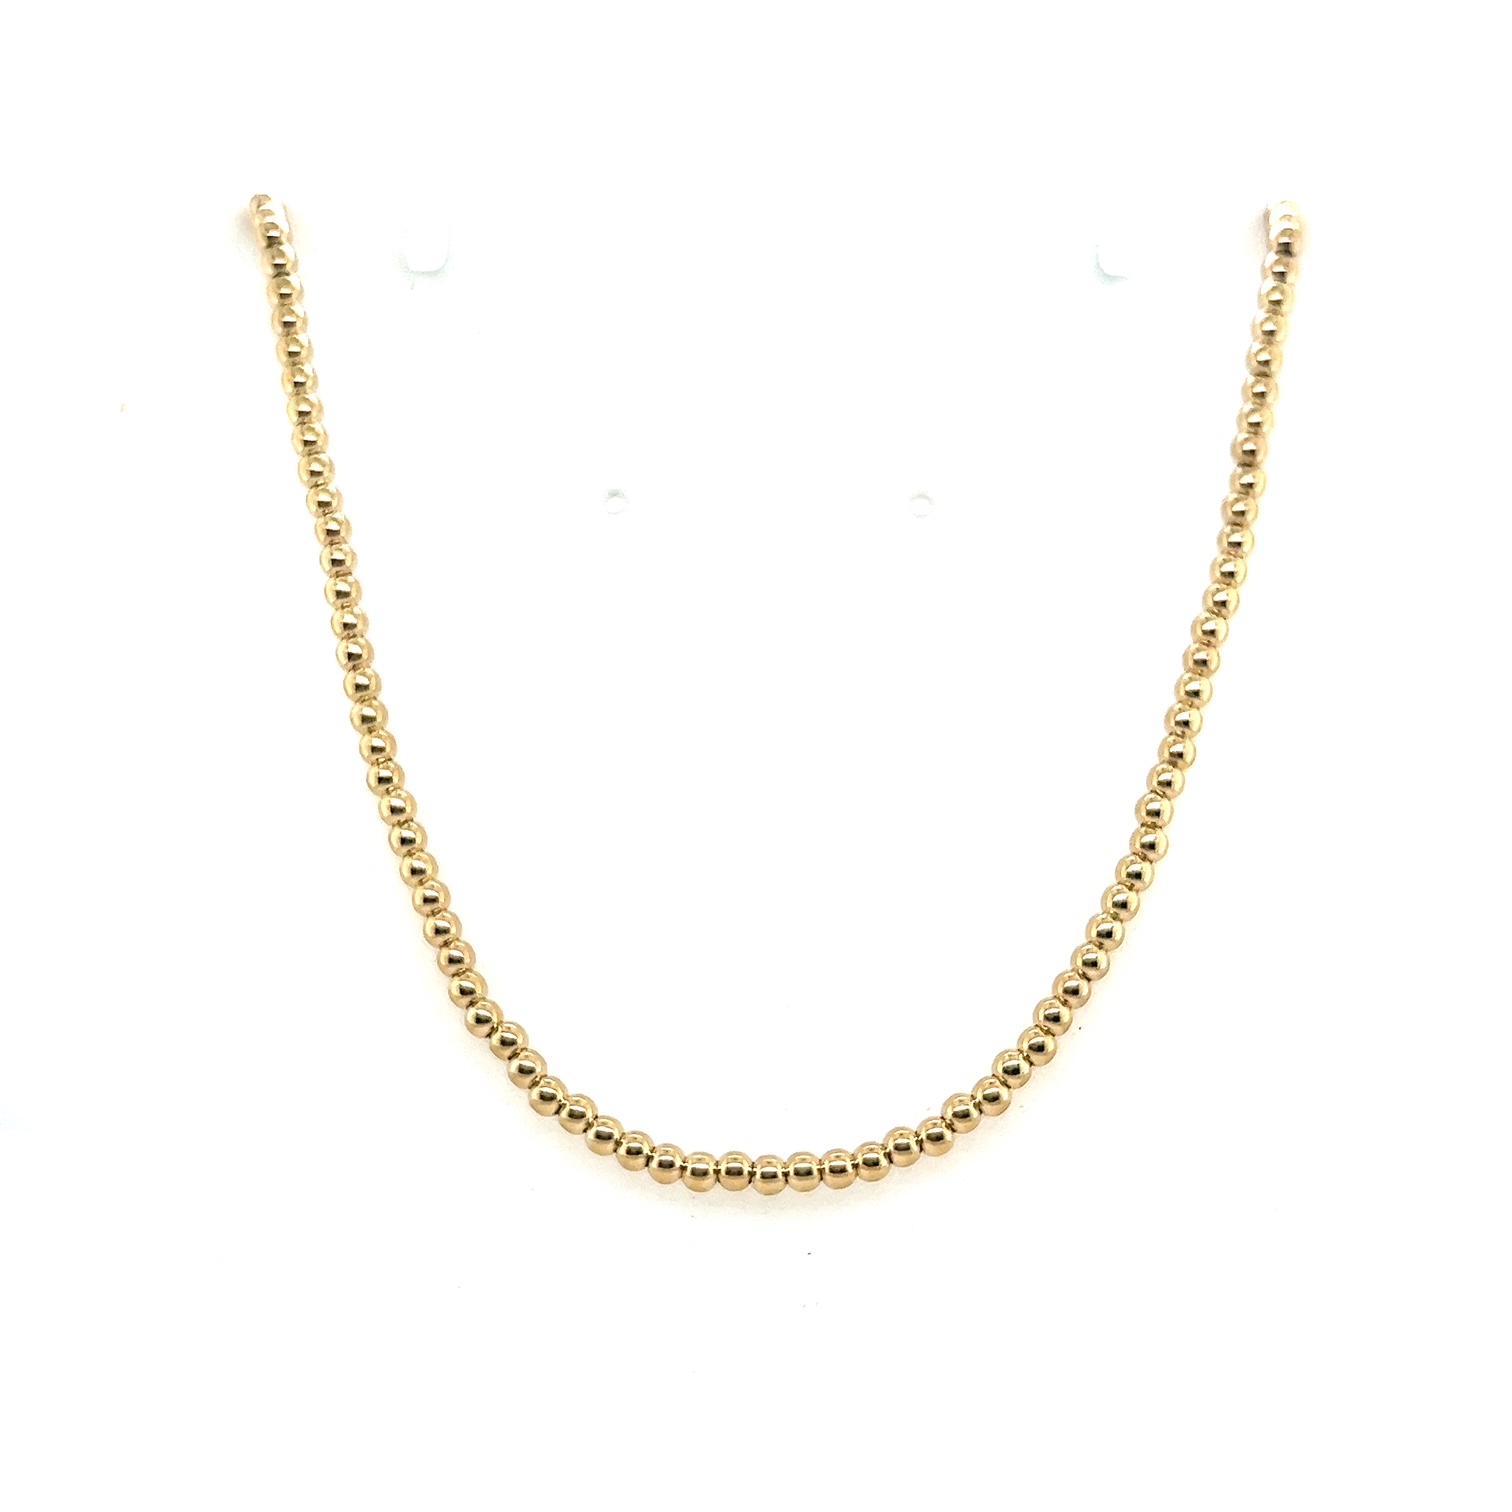 14kt Yellow Gold 3mm Bead Necklace 18"